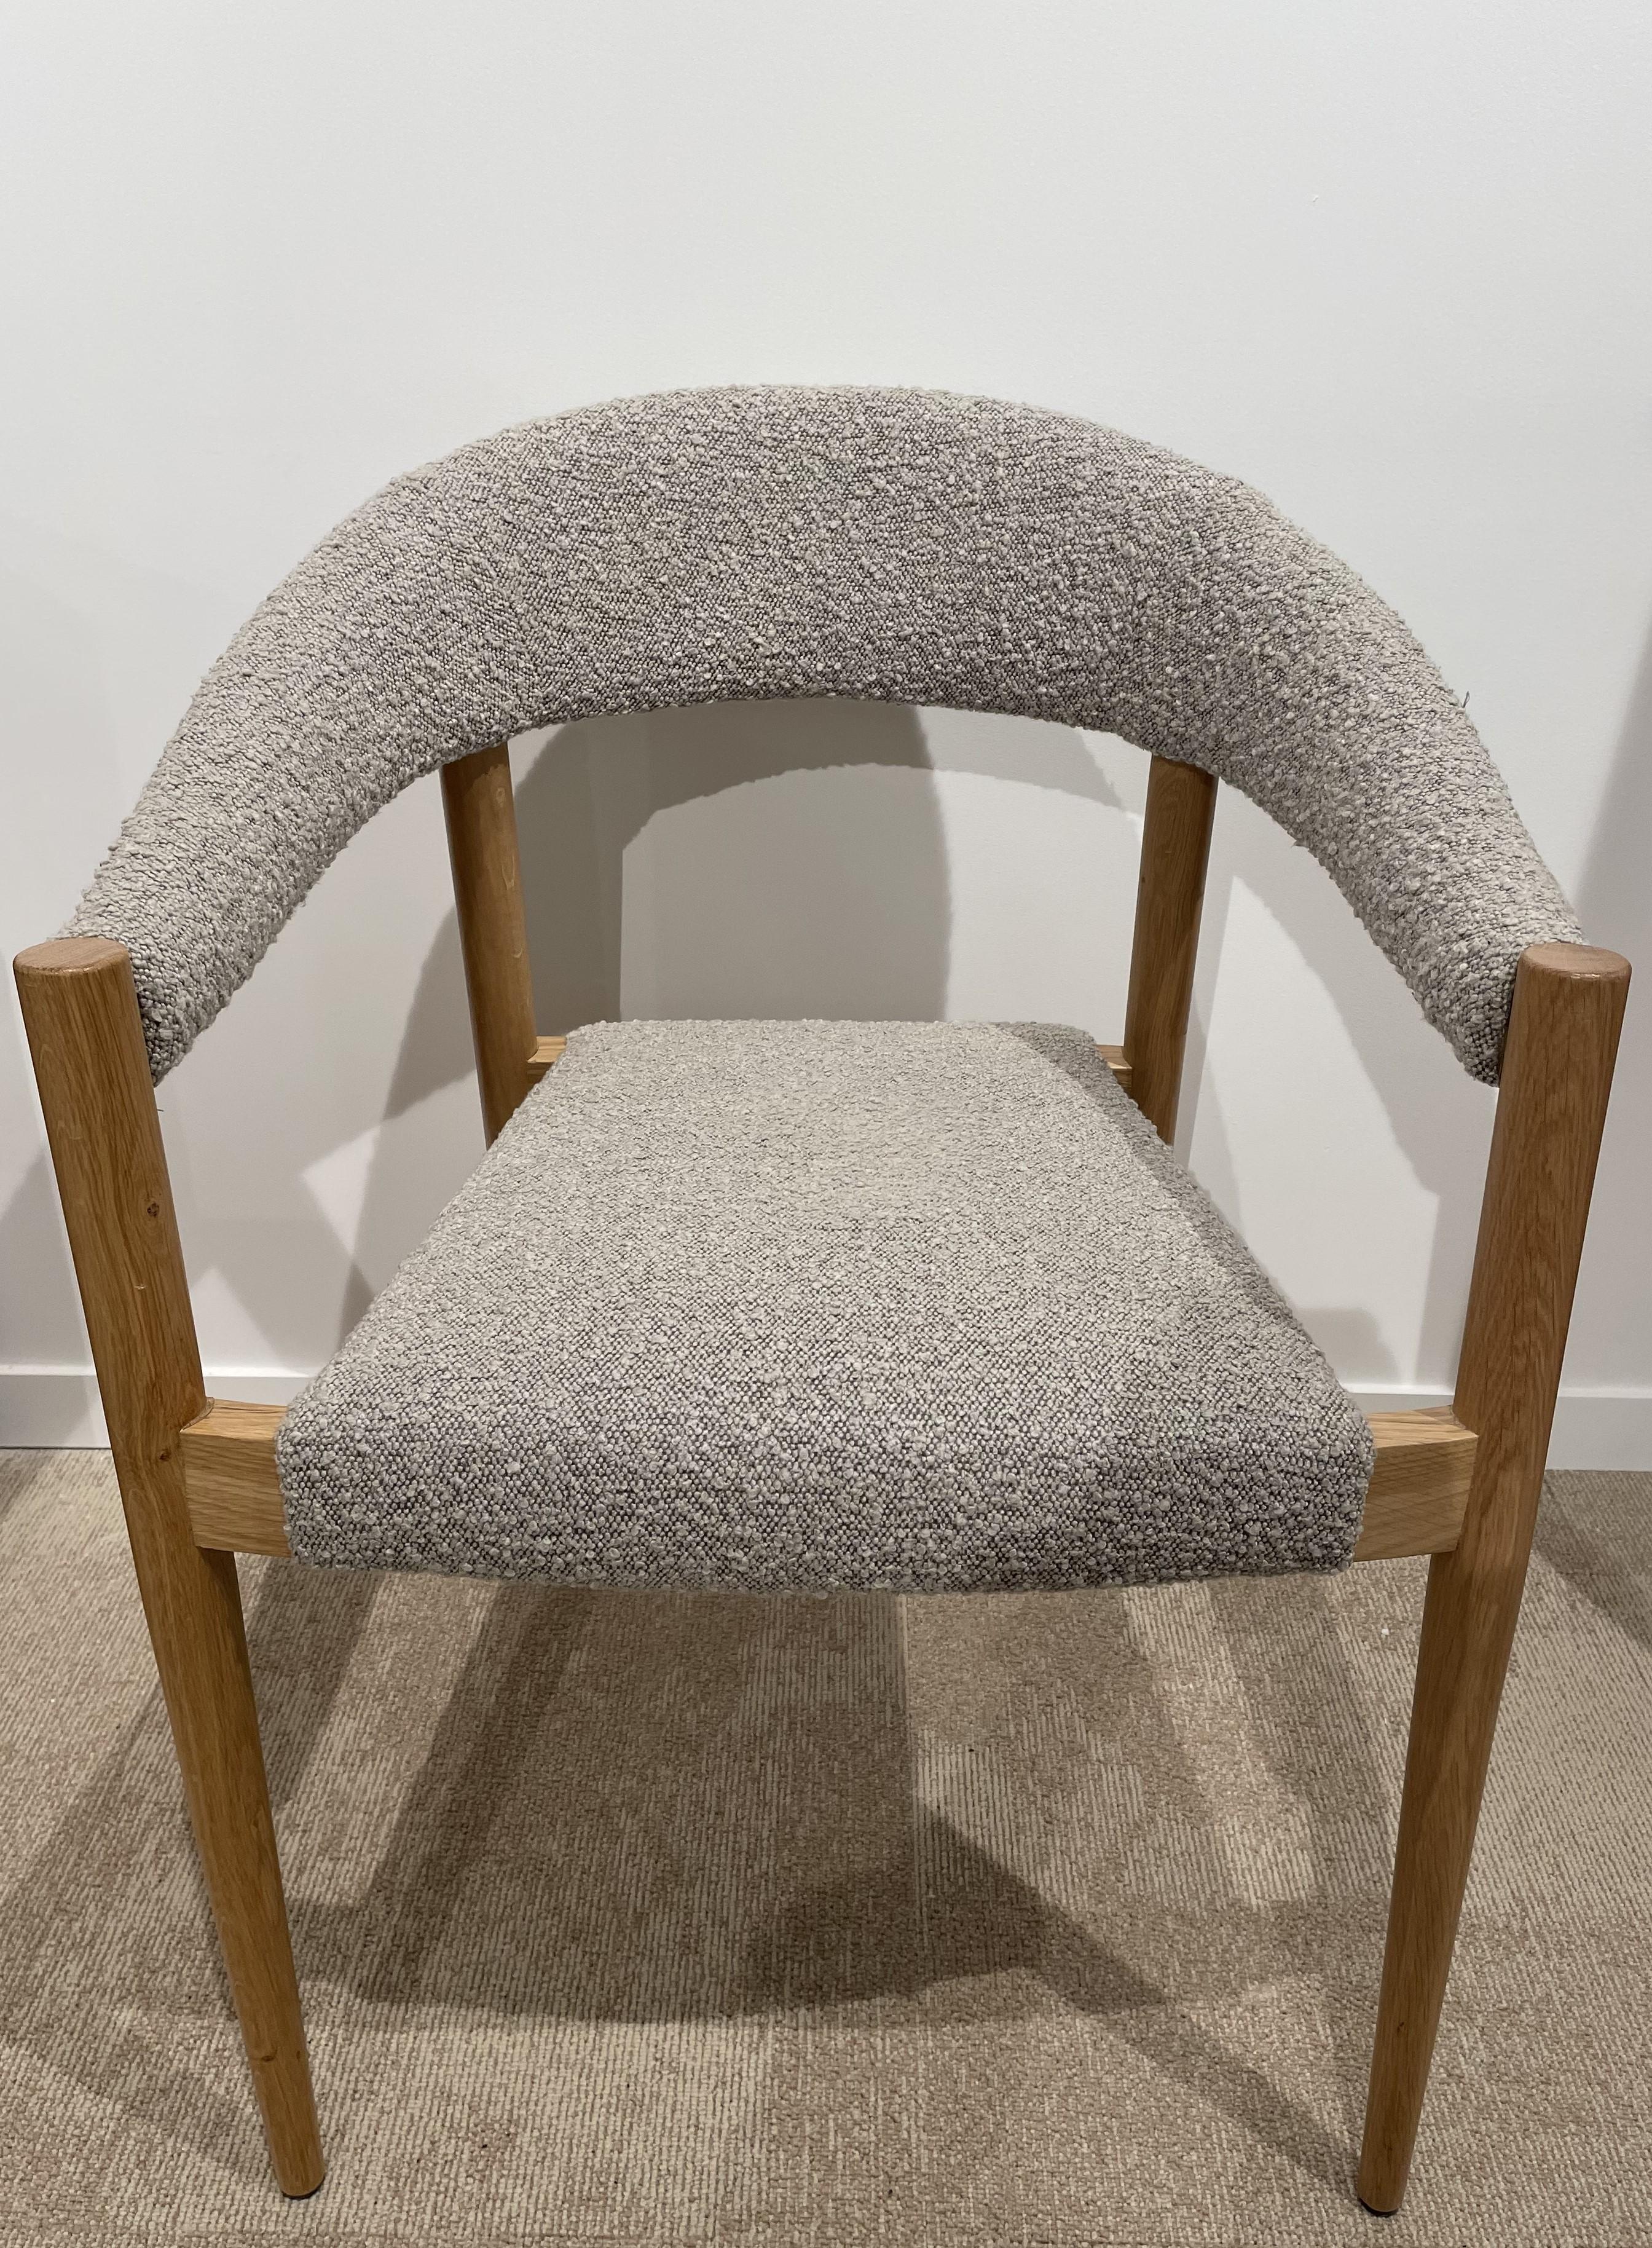 1960s Danish Design and Scandinavian Style Wooden and Bouclé Fabric Chair For Sale 9